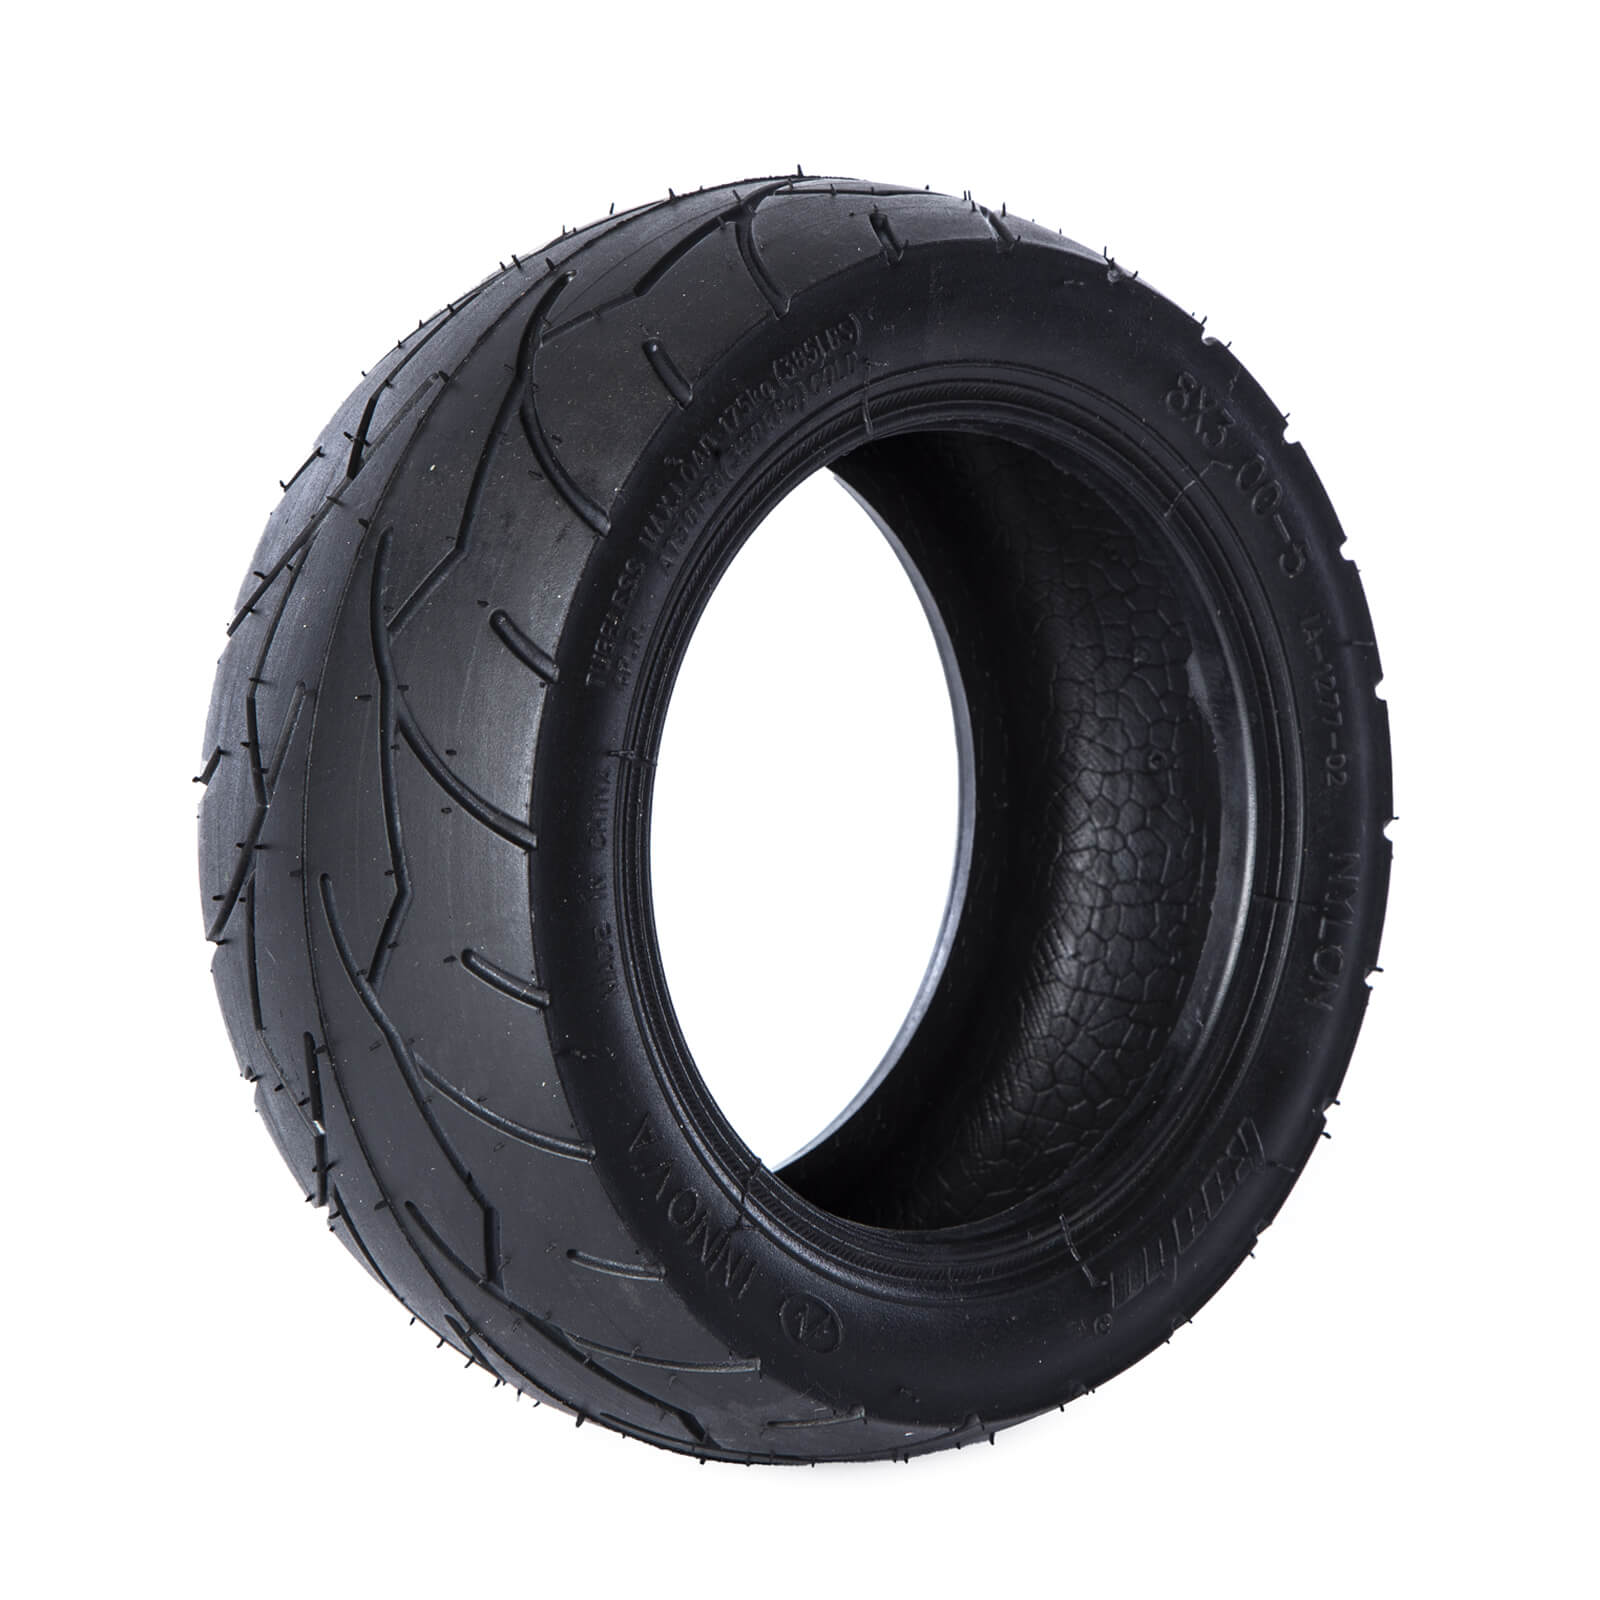 Electric Scooter Tubeless Tyre 8 x 3 - Kaabo Sky 8S, Kaabo